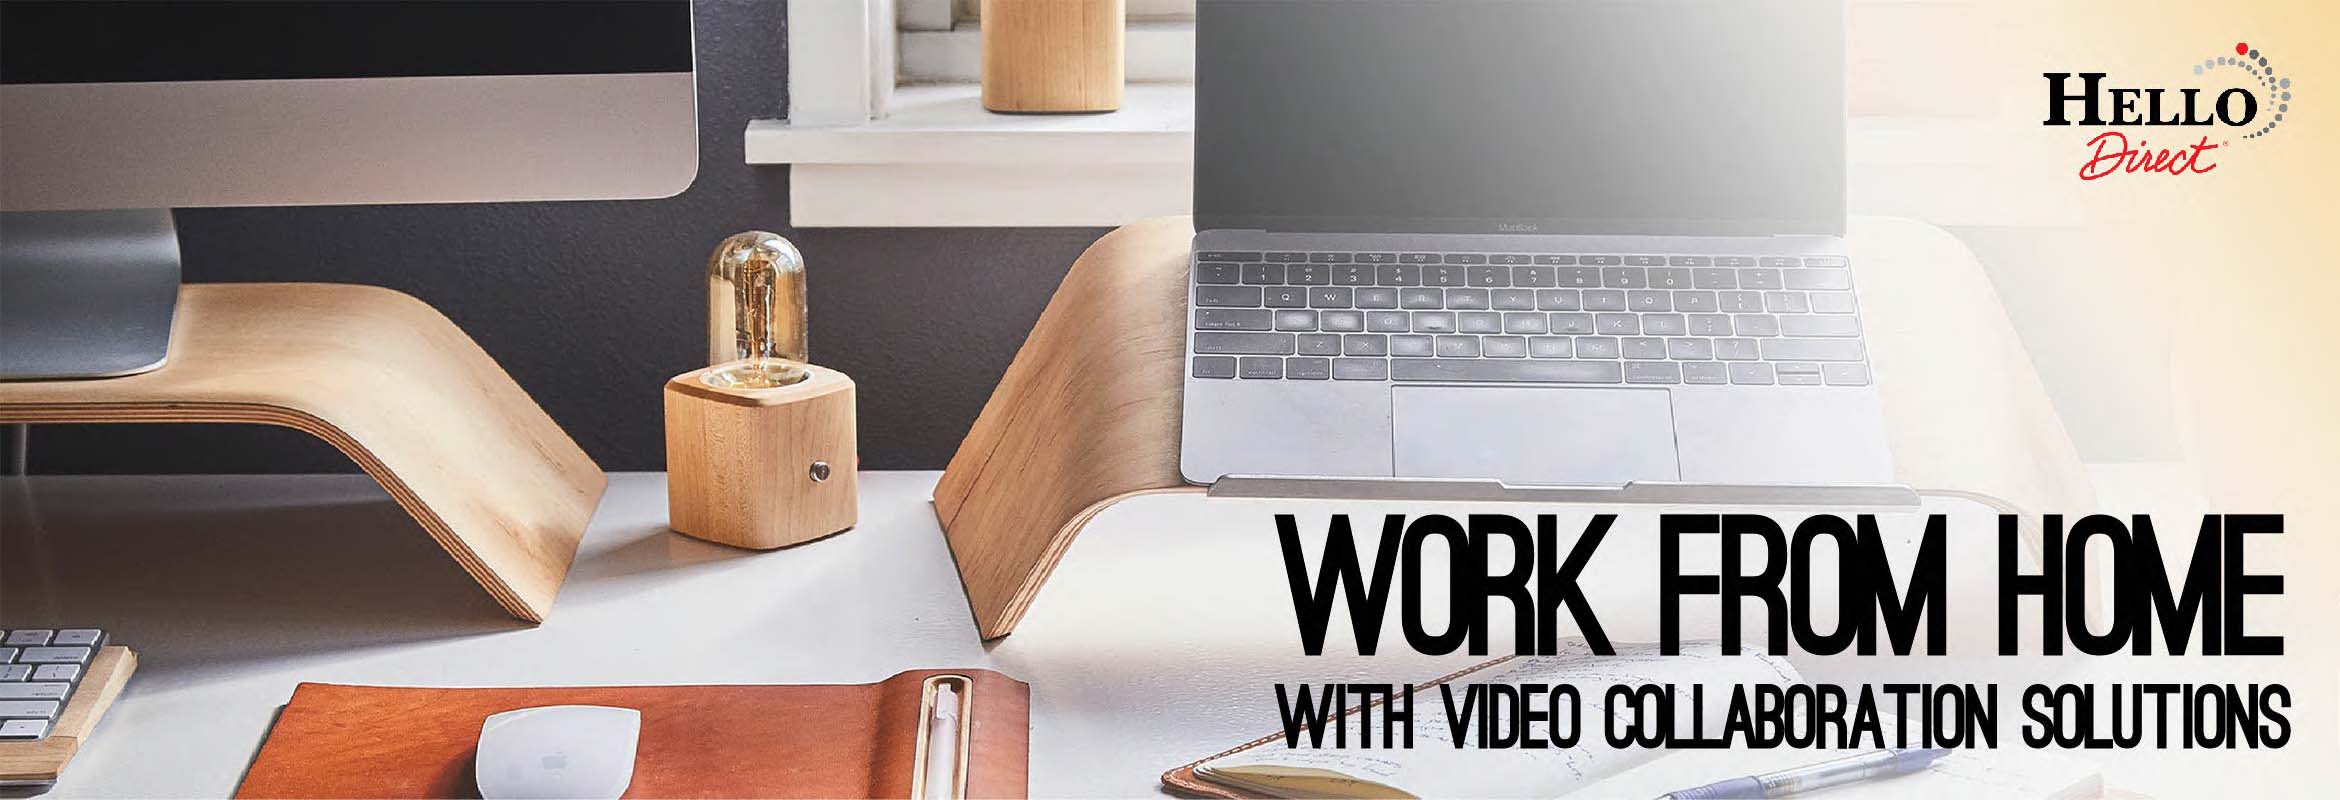 Work From Home Video Conferencing at Hello Direct